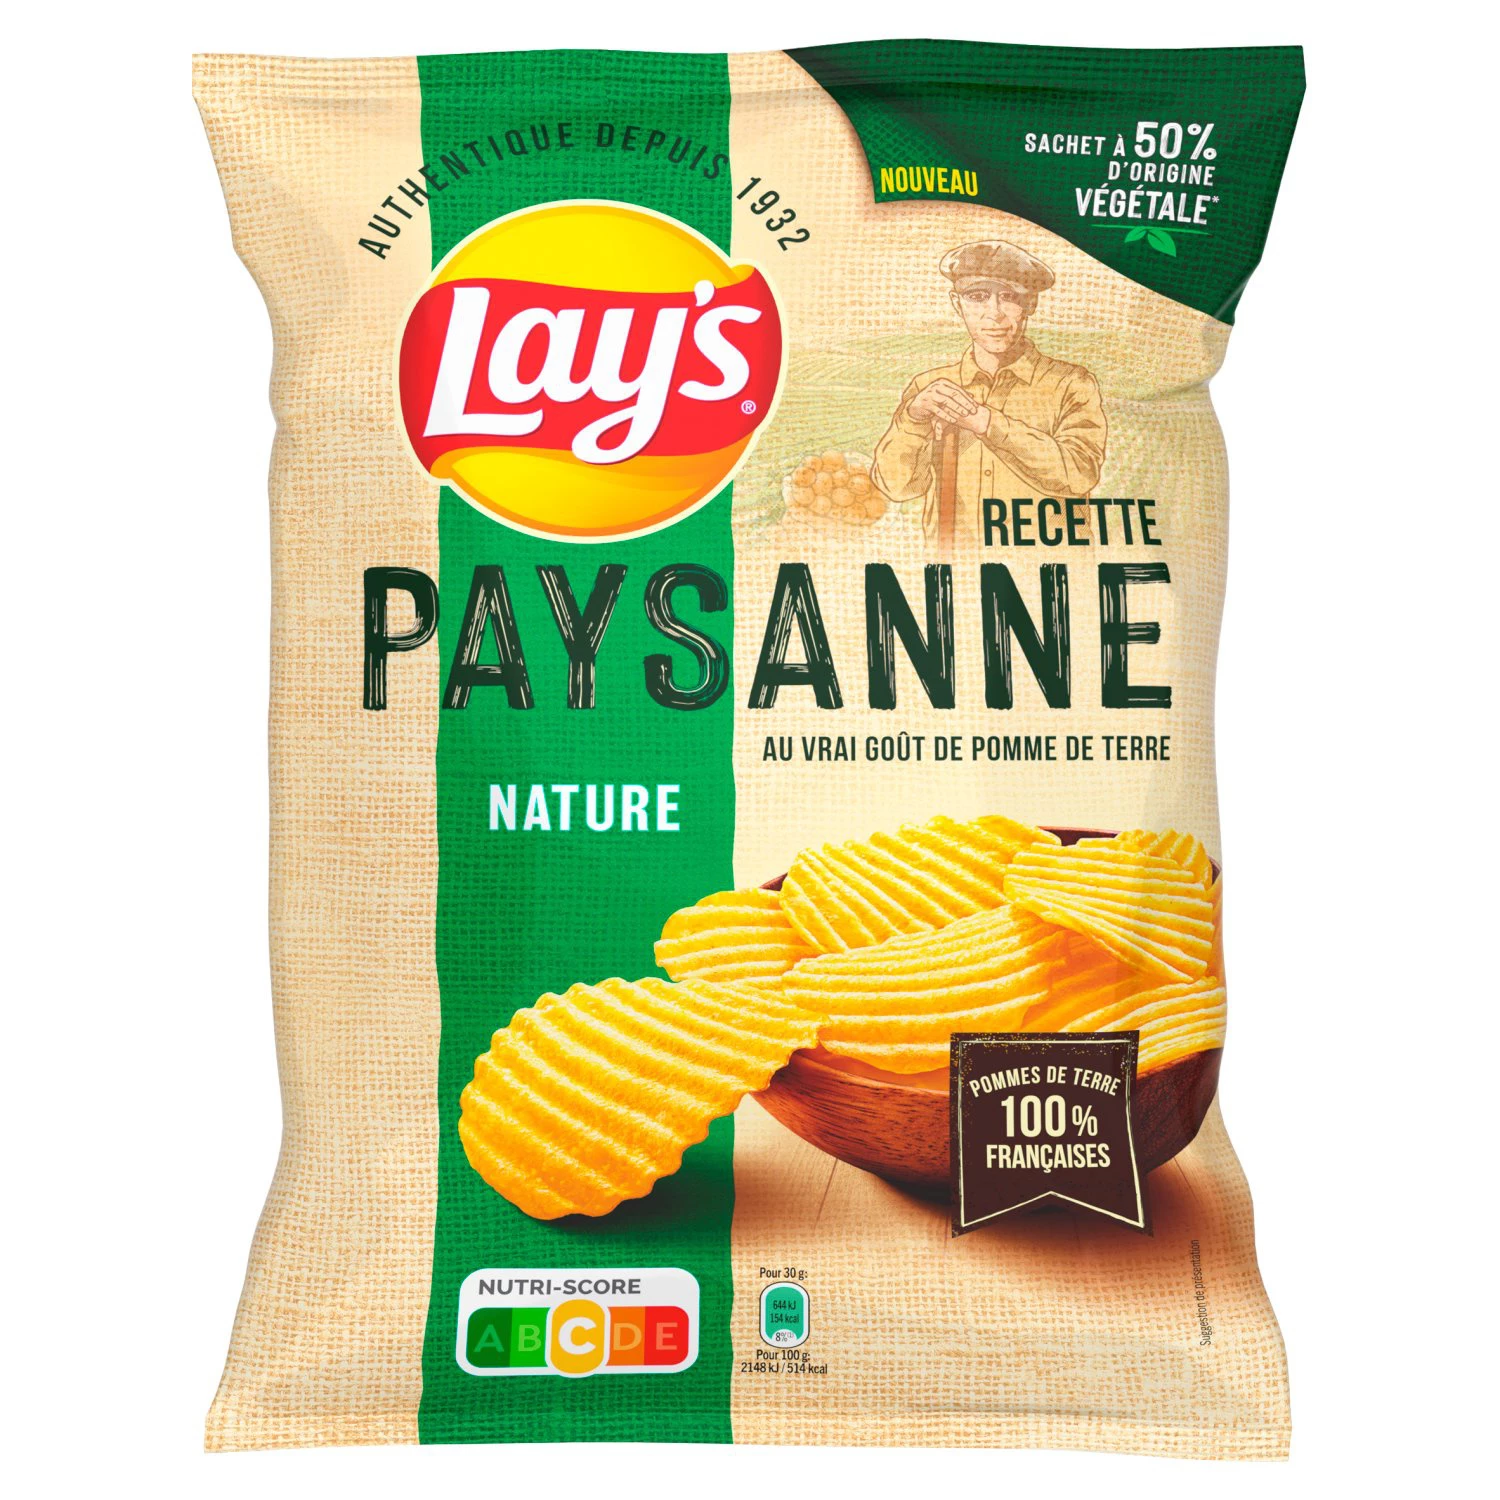 Chips Camponeses Naturais 155g - LAY'S